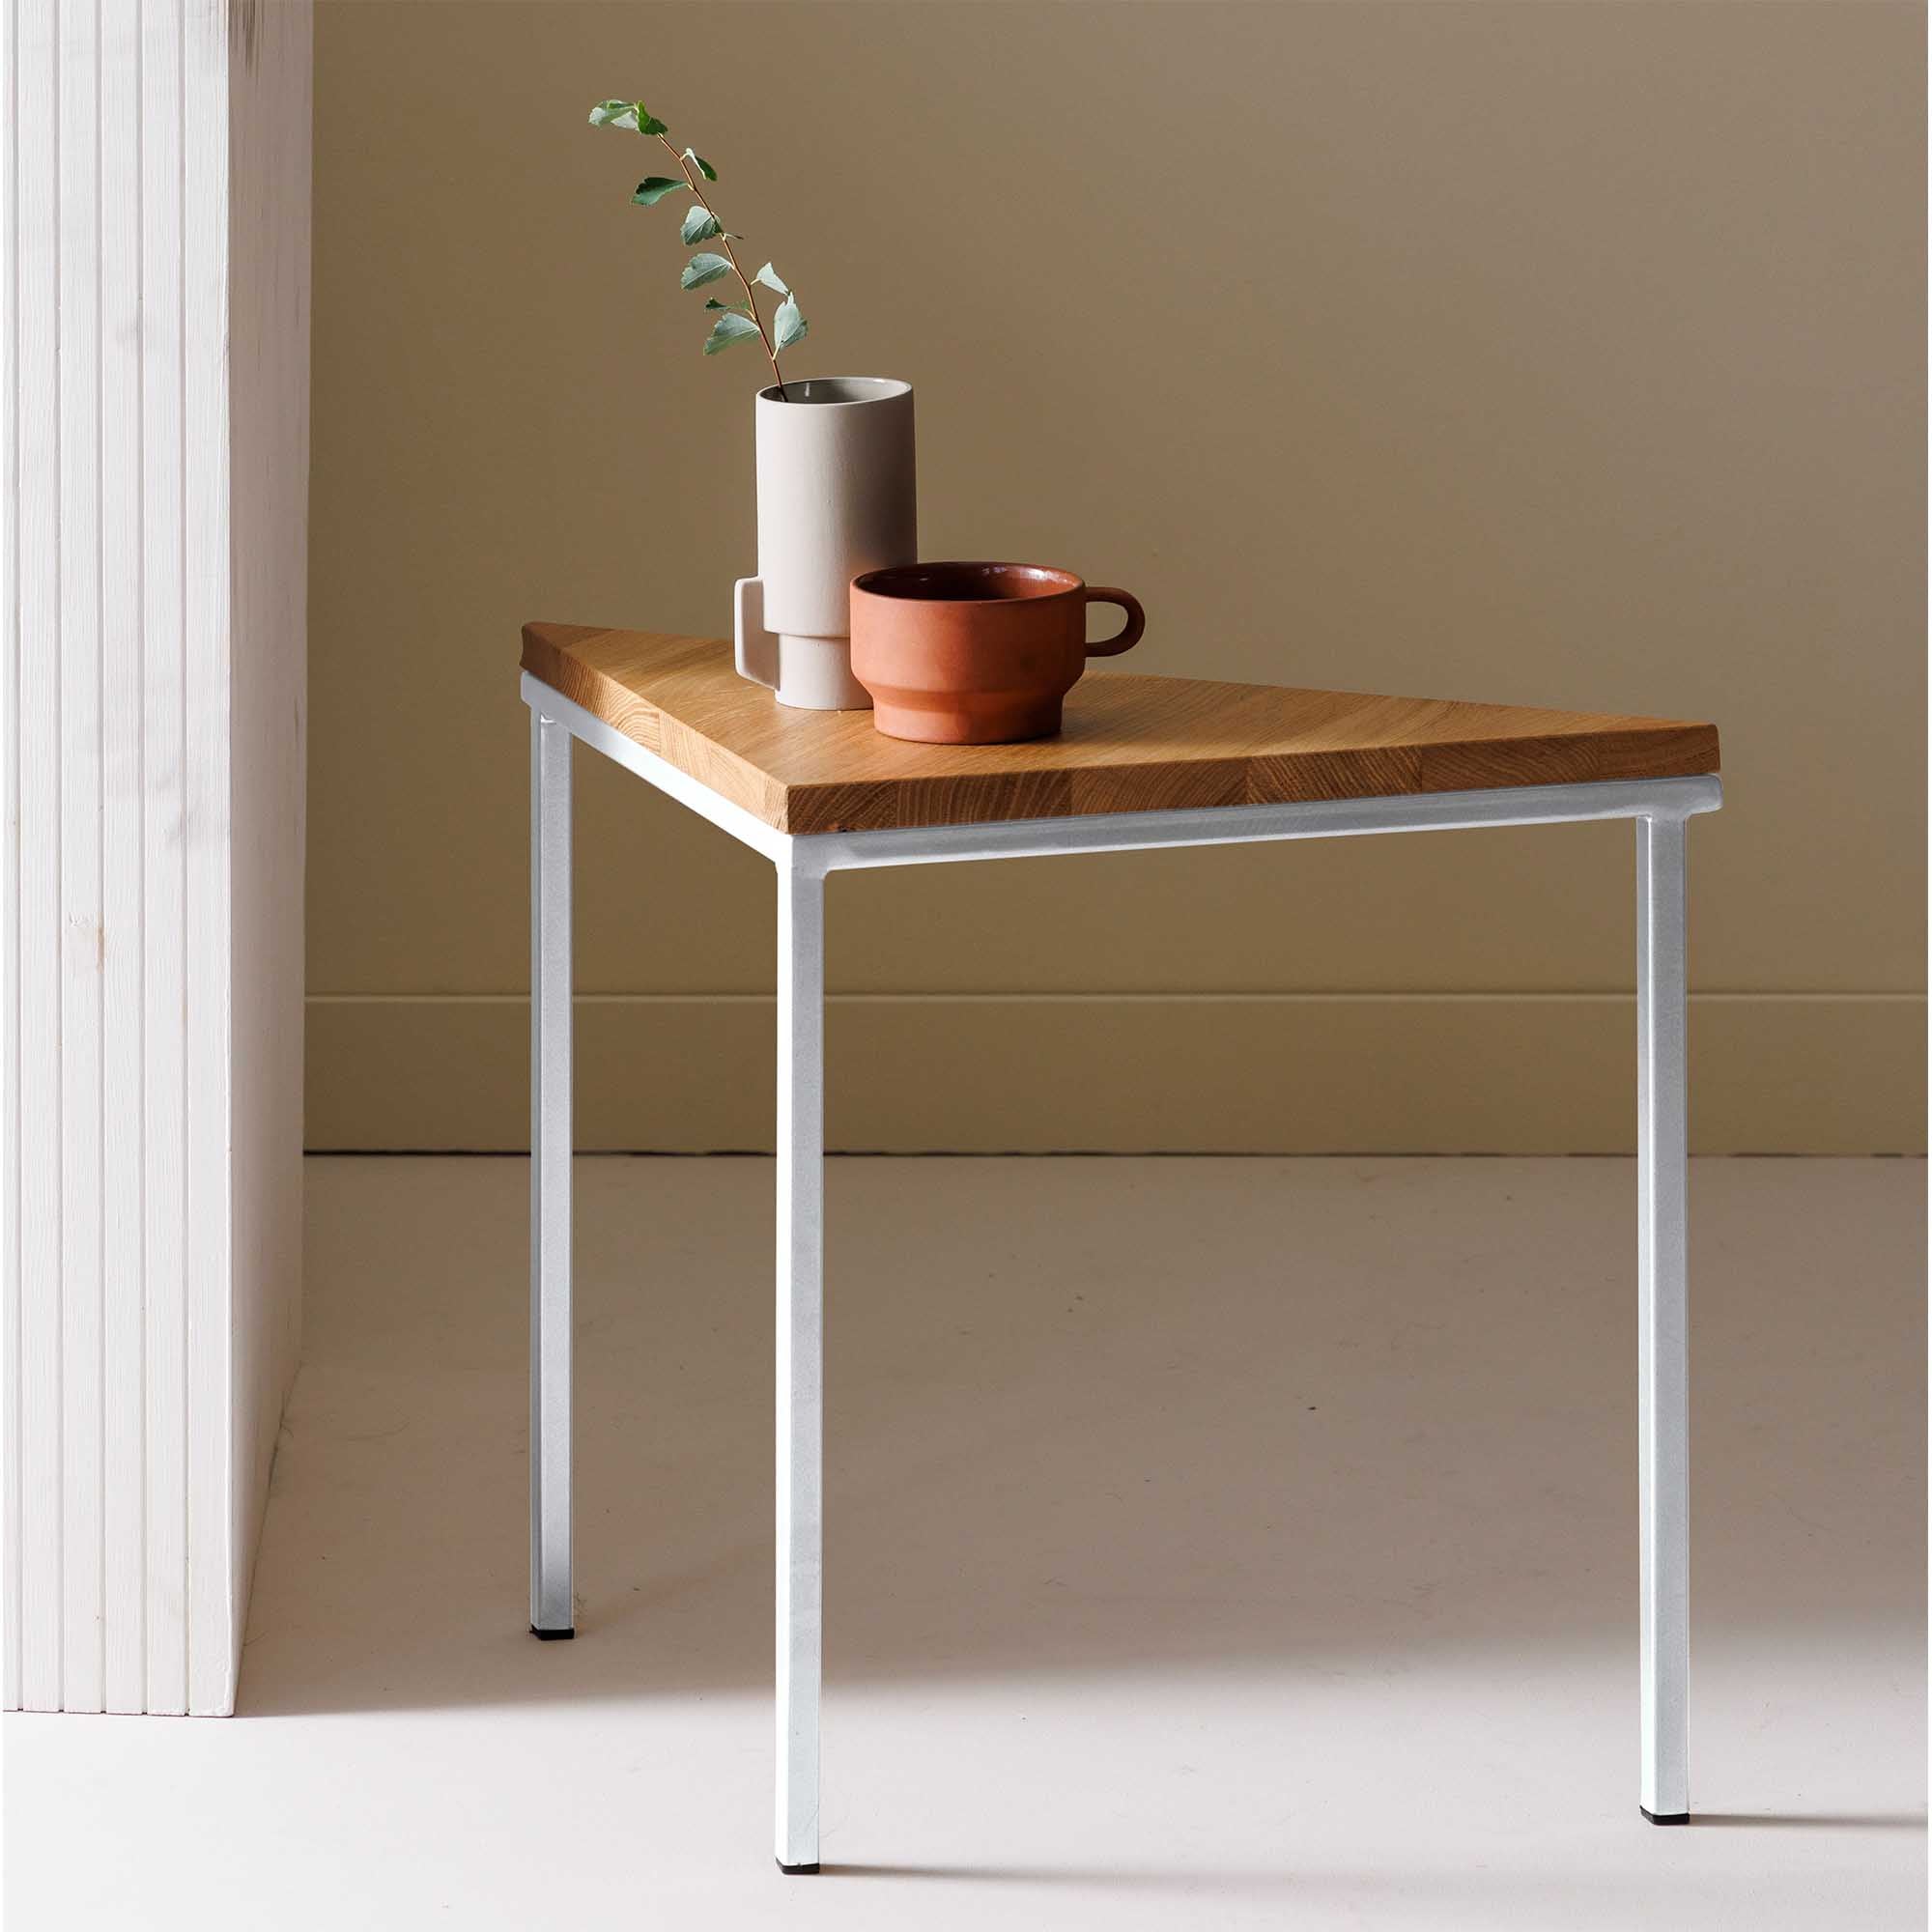 Tripod Table, Oak Wood, Natural Colour white frame, interior view with vase and mug